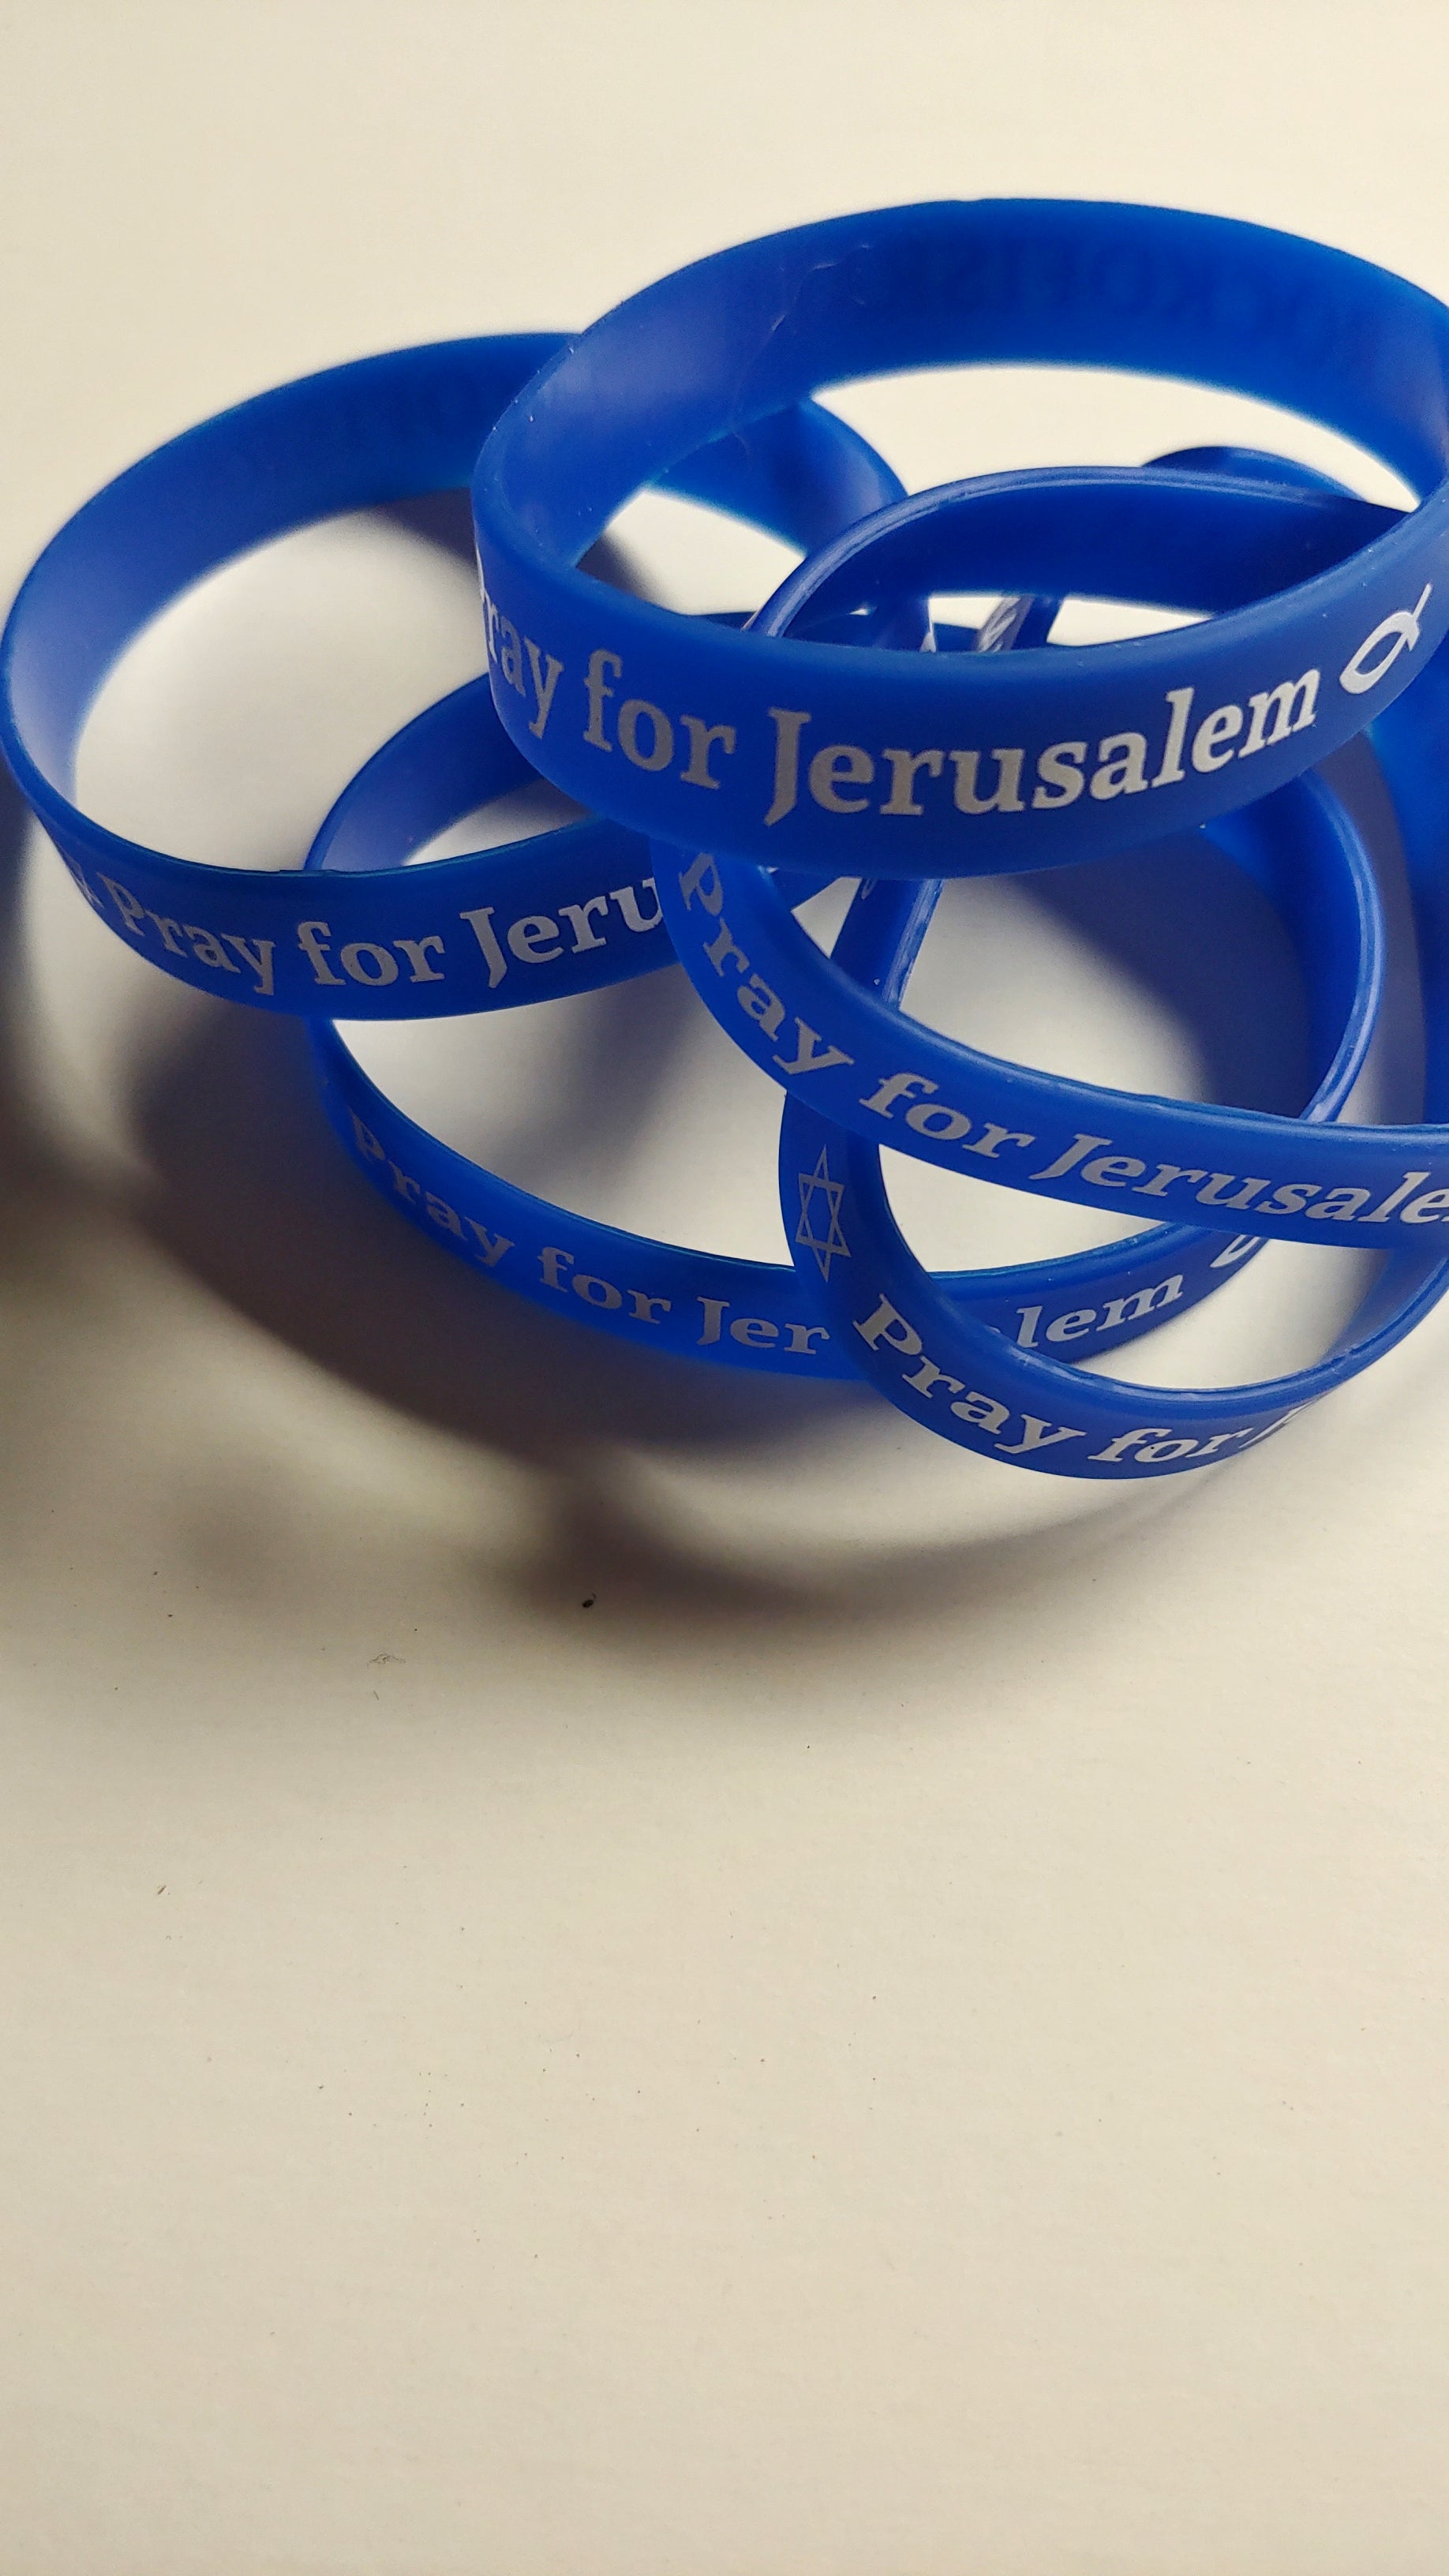 Pray for Jerusalem / Pray Store – rubber for Rock Israel Israel of wristband